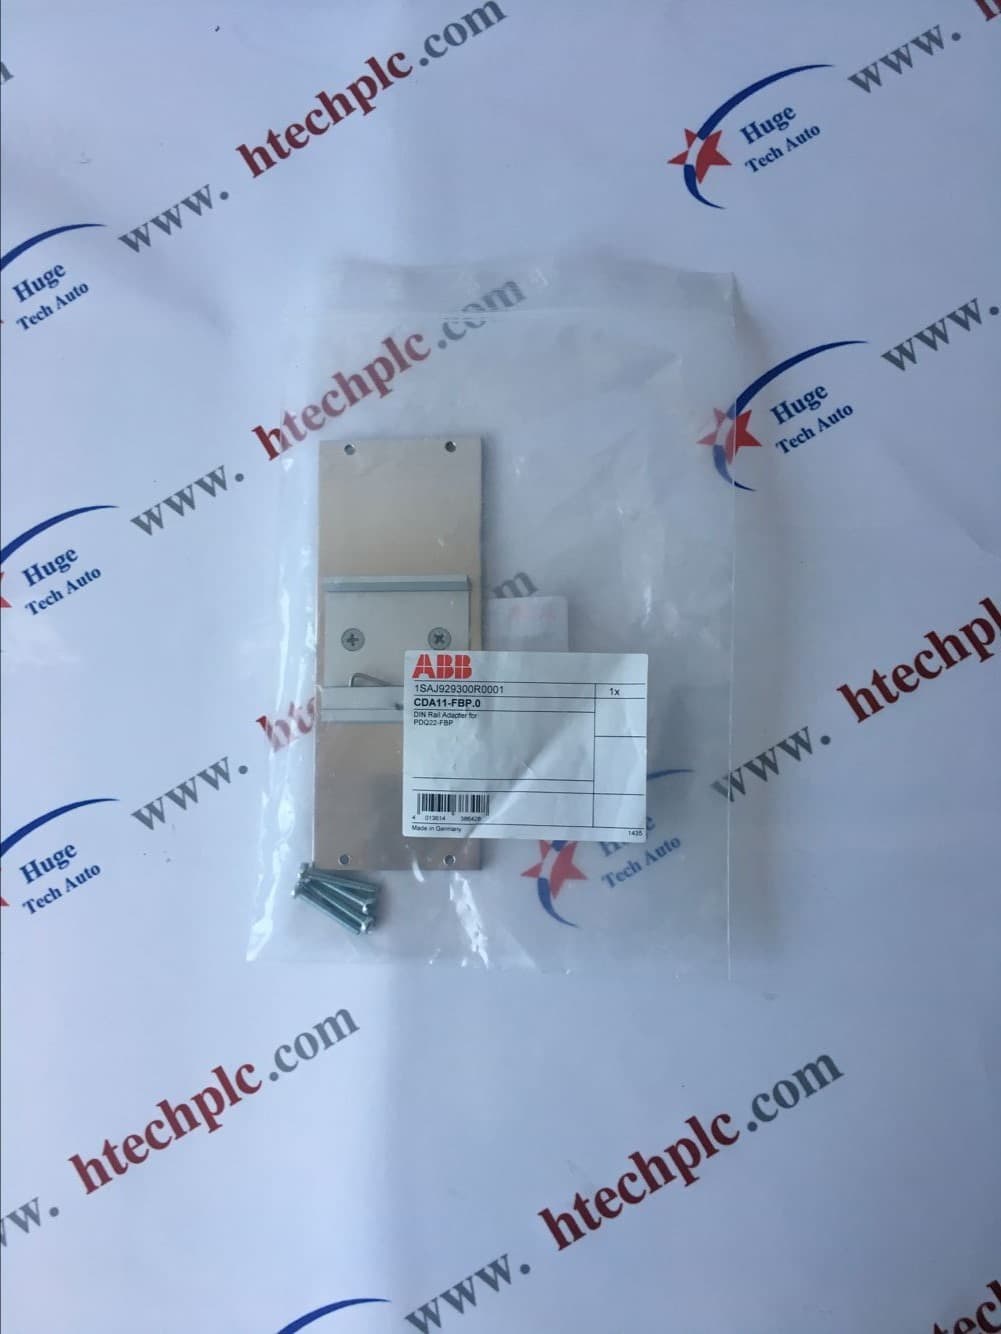 ABB 5STP 38Q4200 industrial spare parts with 12 months warra